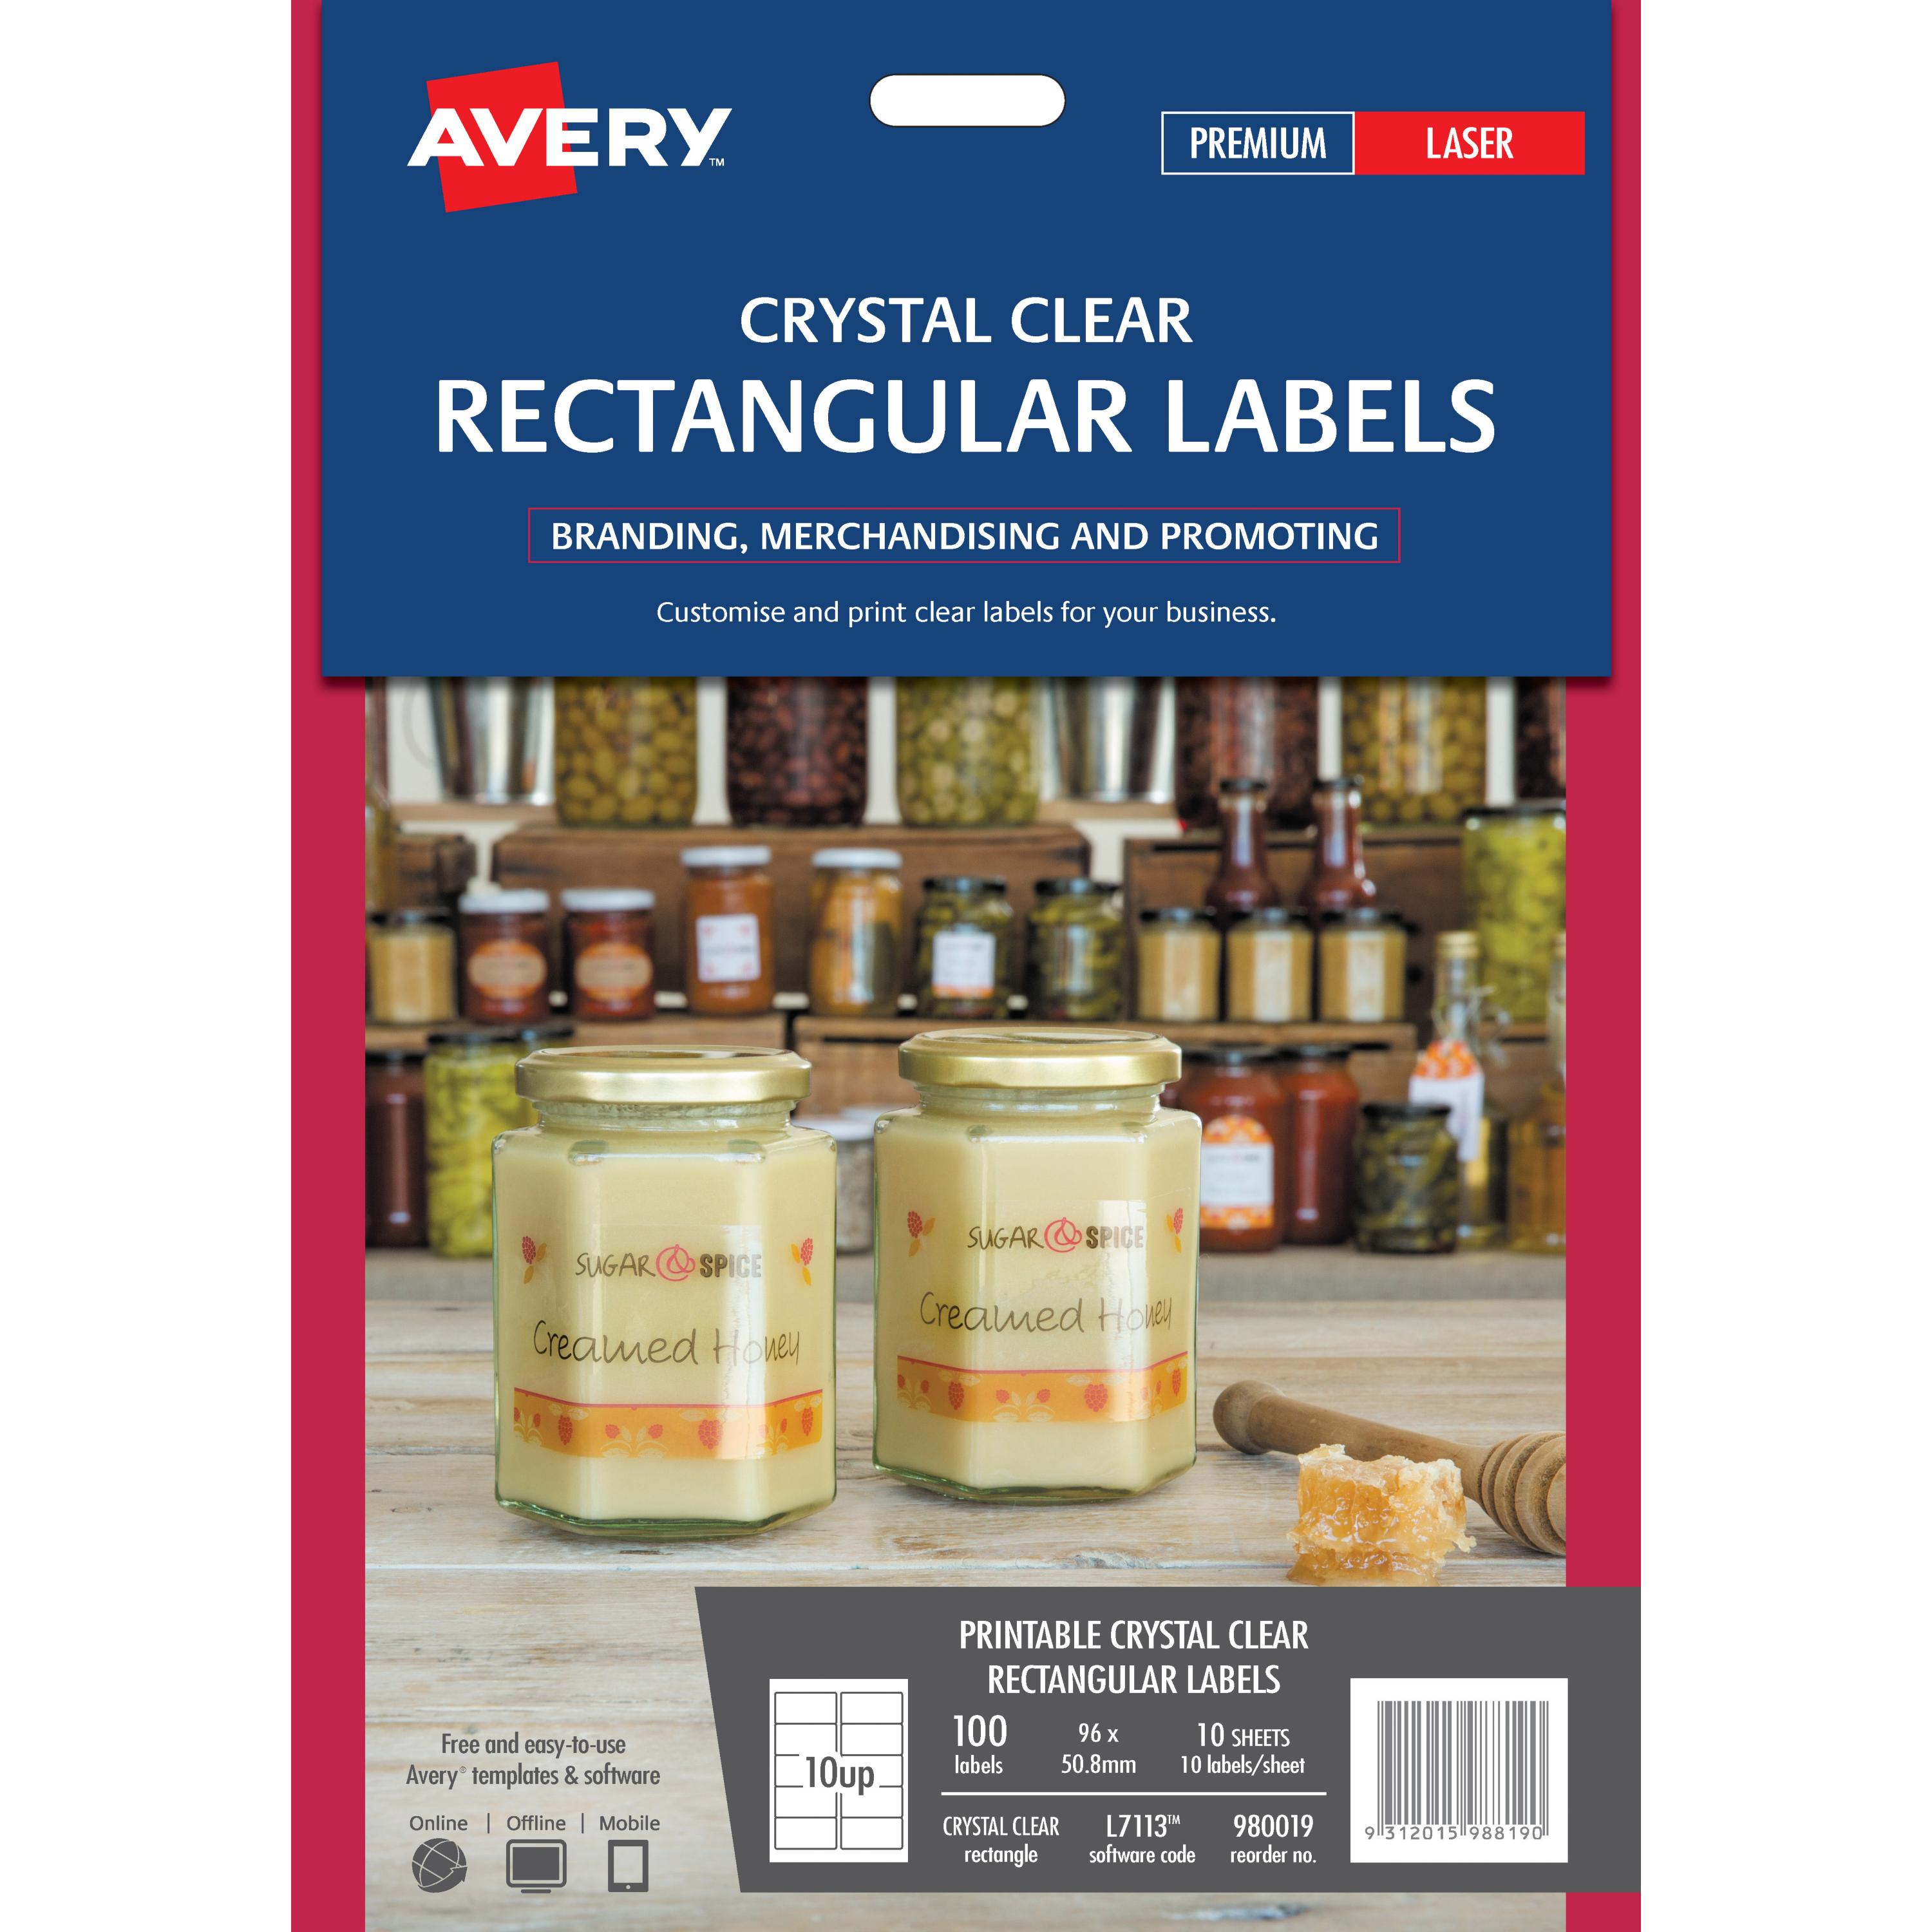 Avery Labels - Crystal Clear Rectangular - 96 x 50.8mm